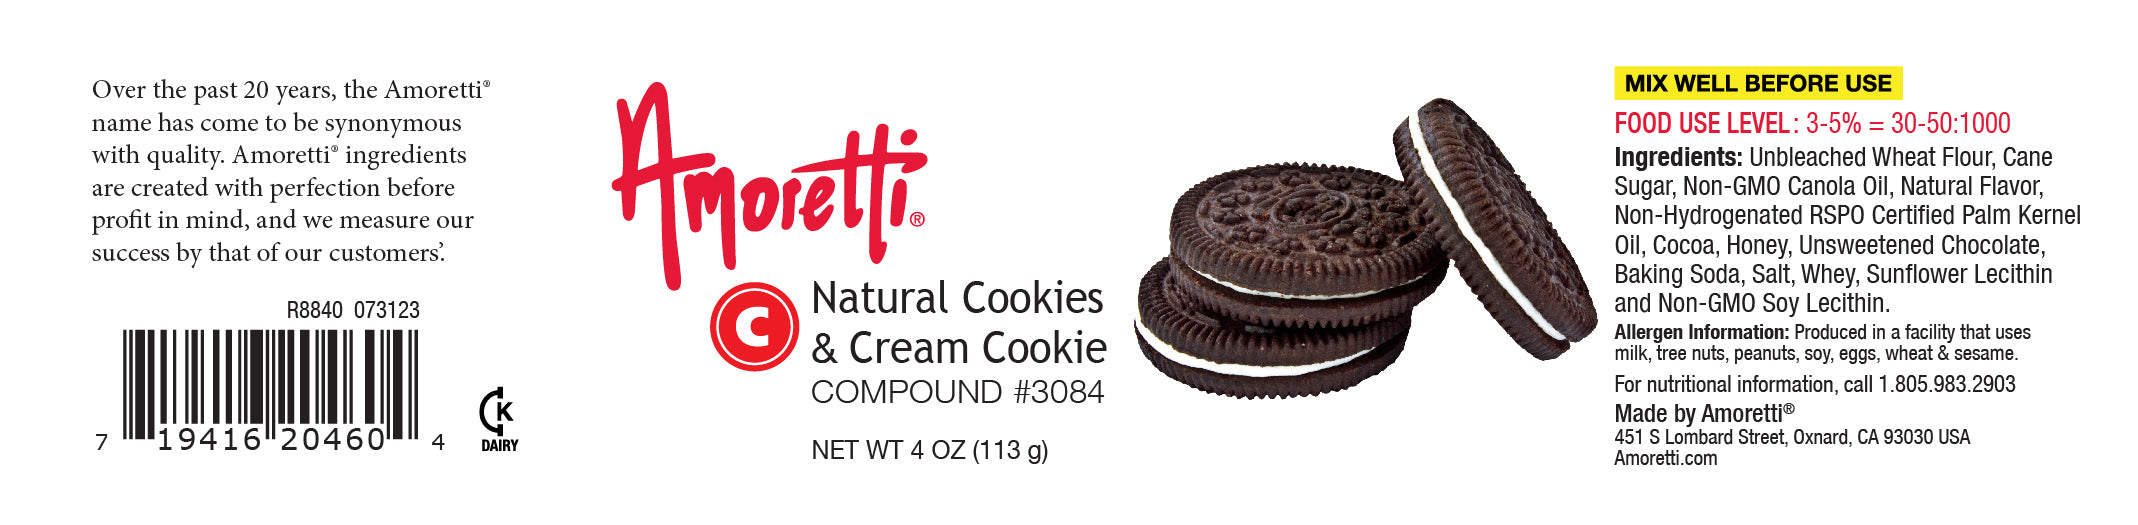 Natural Cookies & Cream Cookie Compound